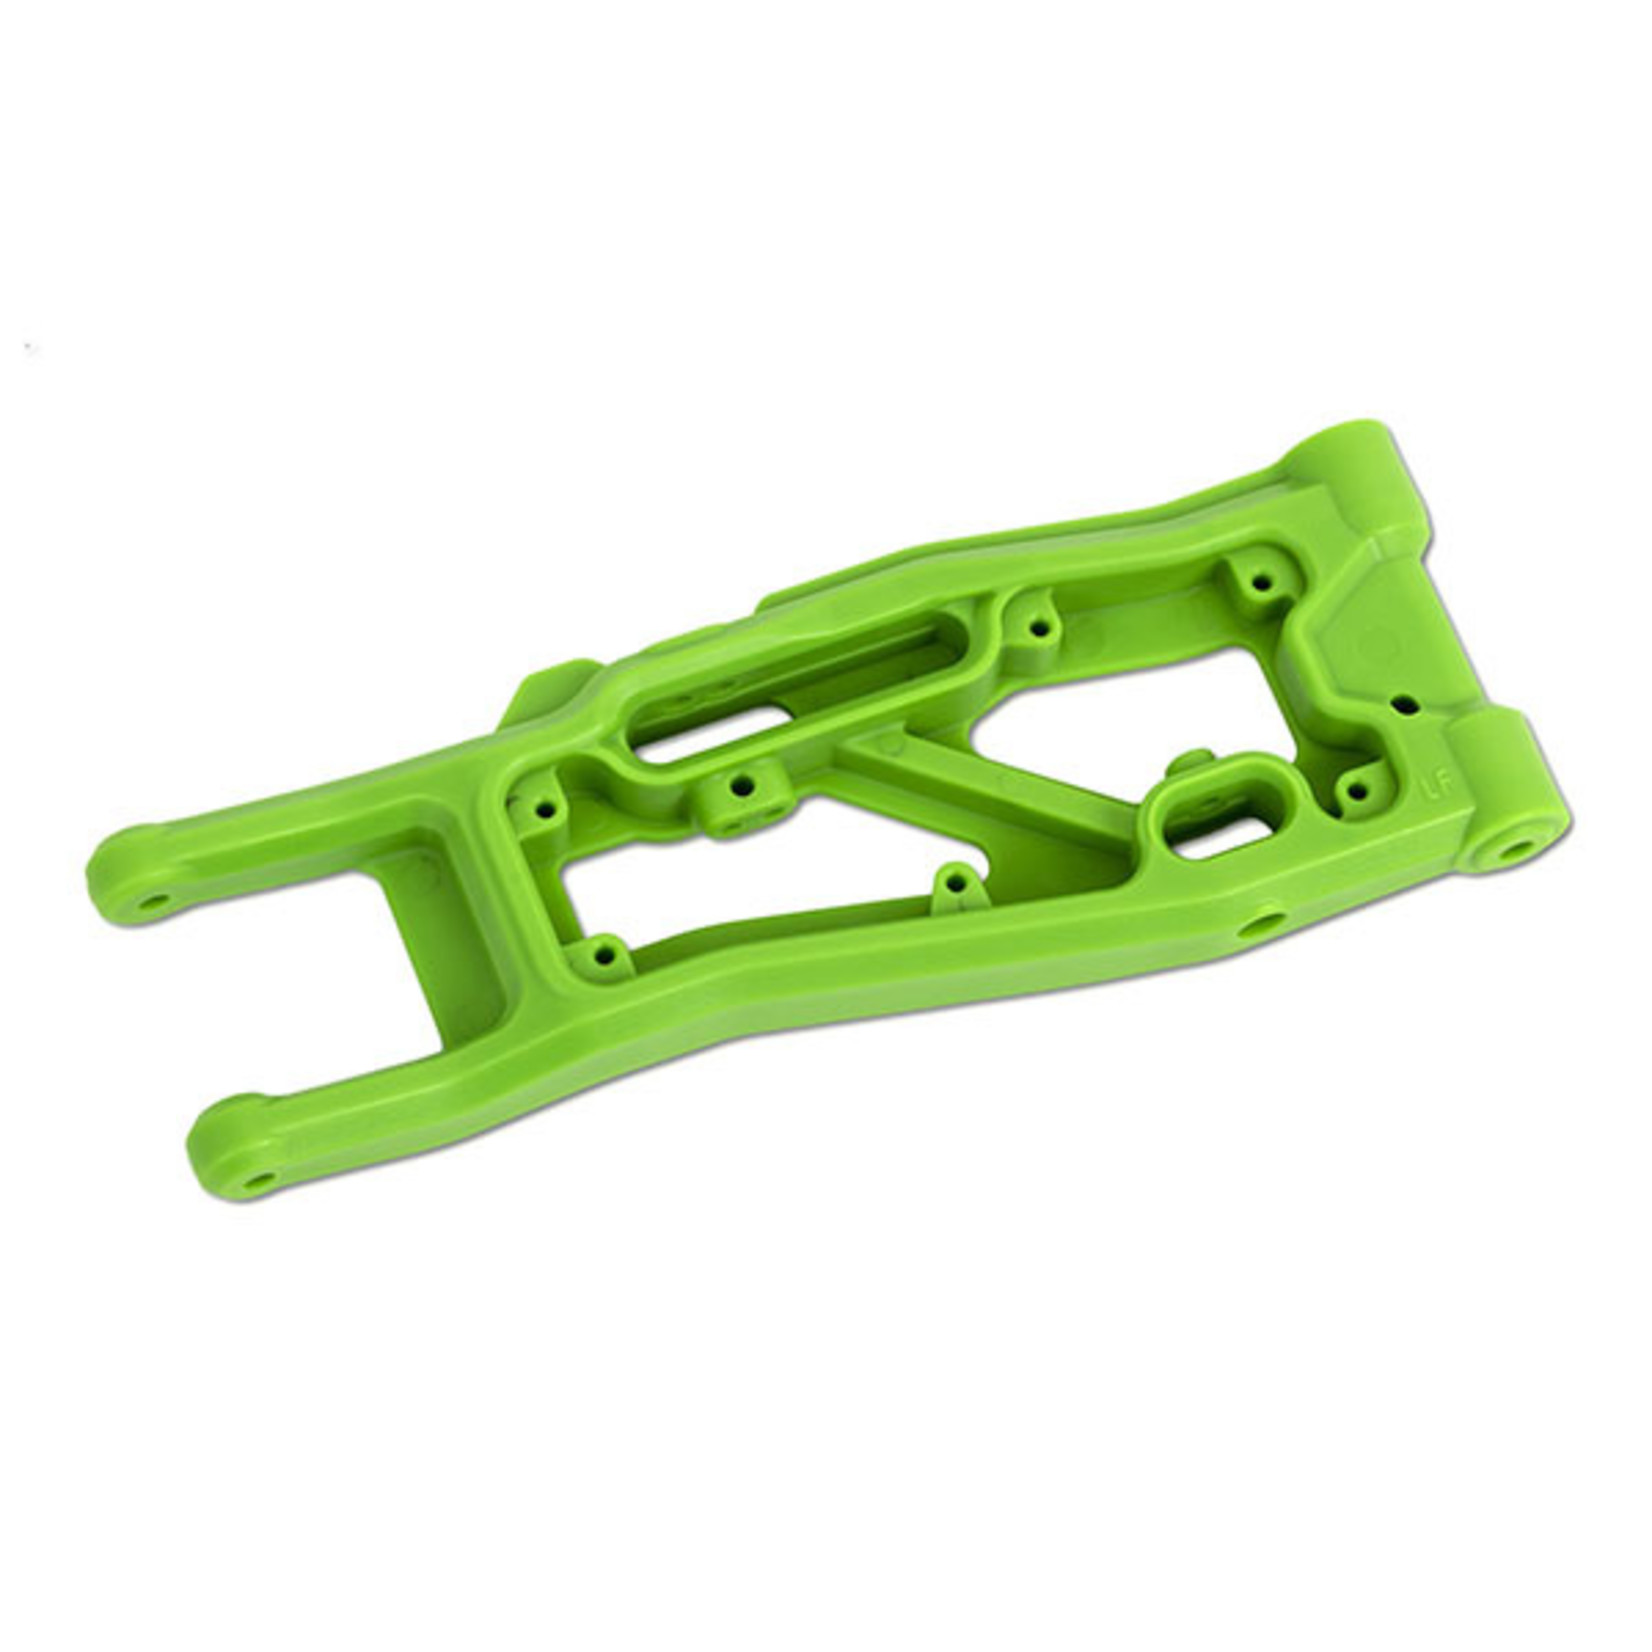 Traxxas 9531G - Suspension arm, front (left), green